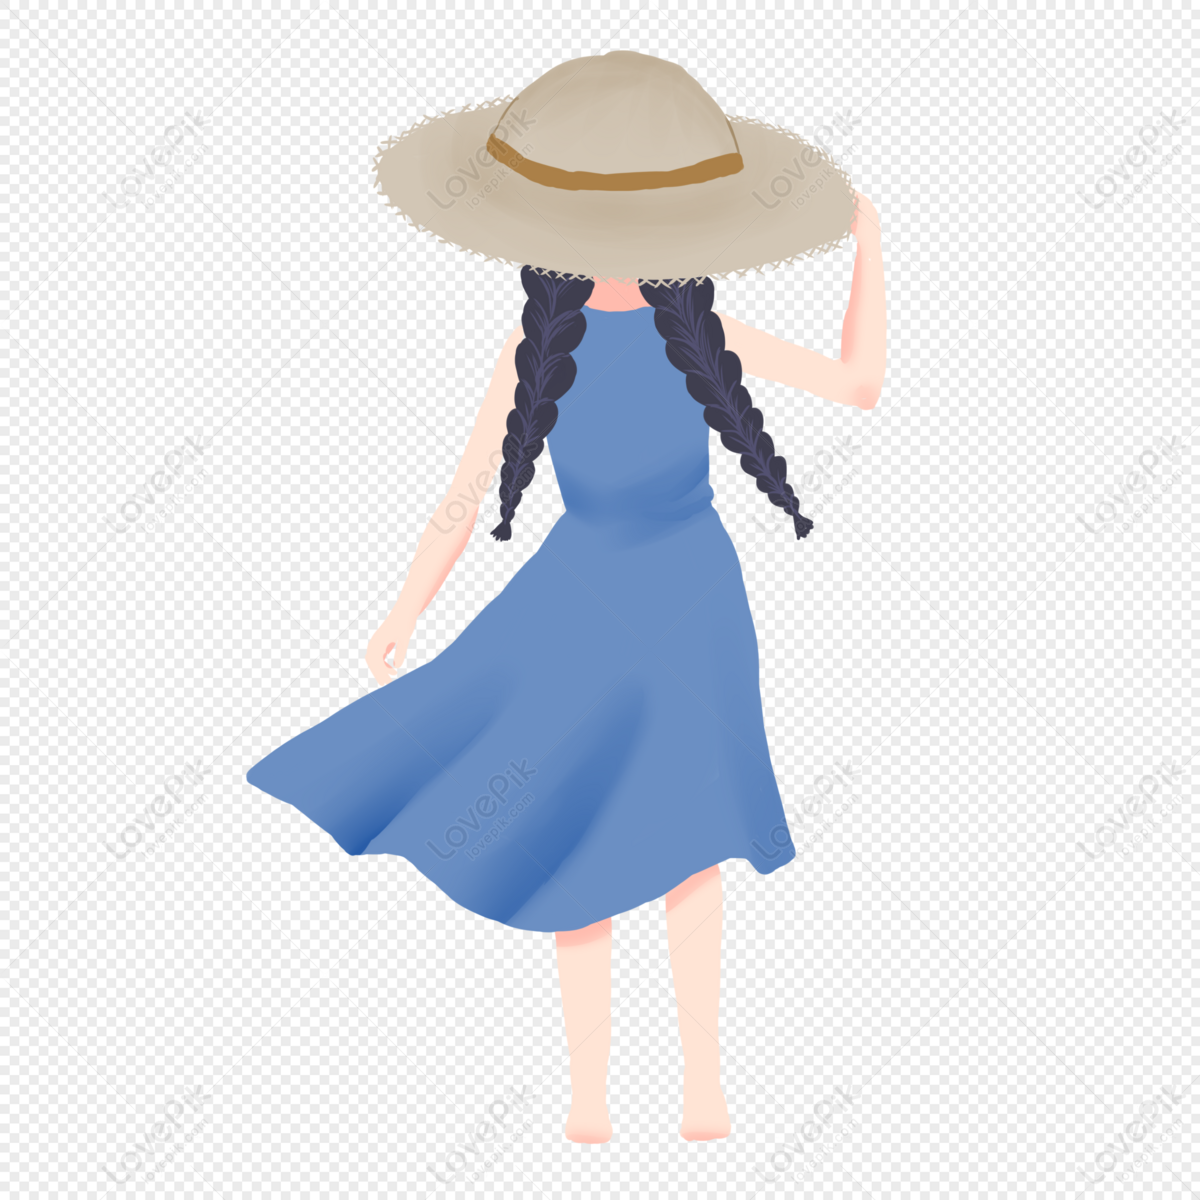 Girl Back Free PNG And Clipart Image For Free Download - Lovepik ...